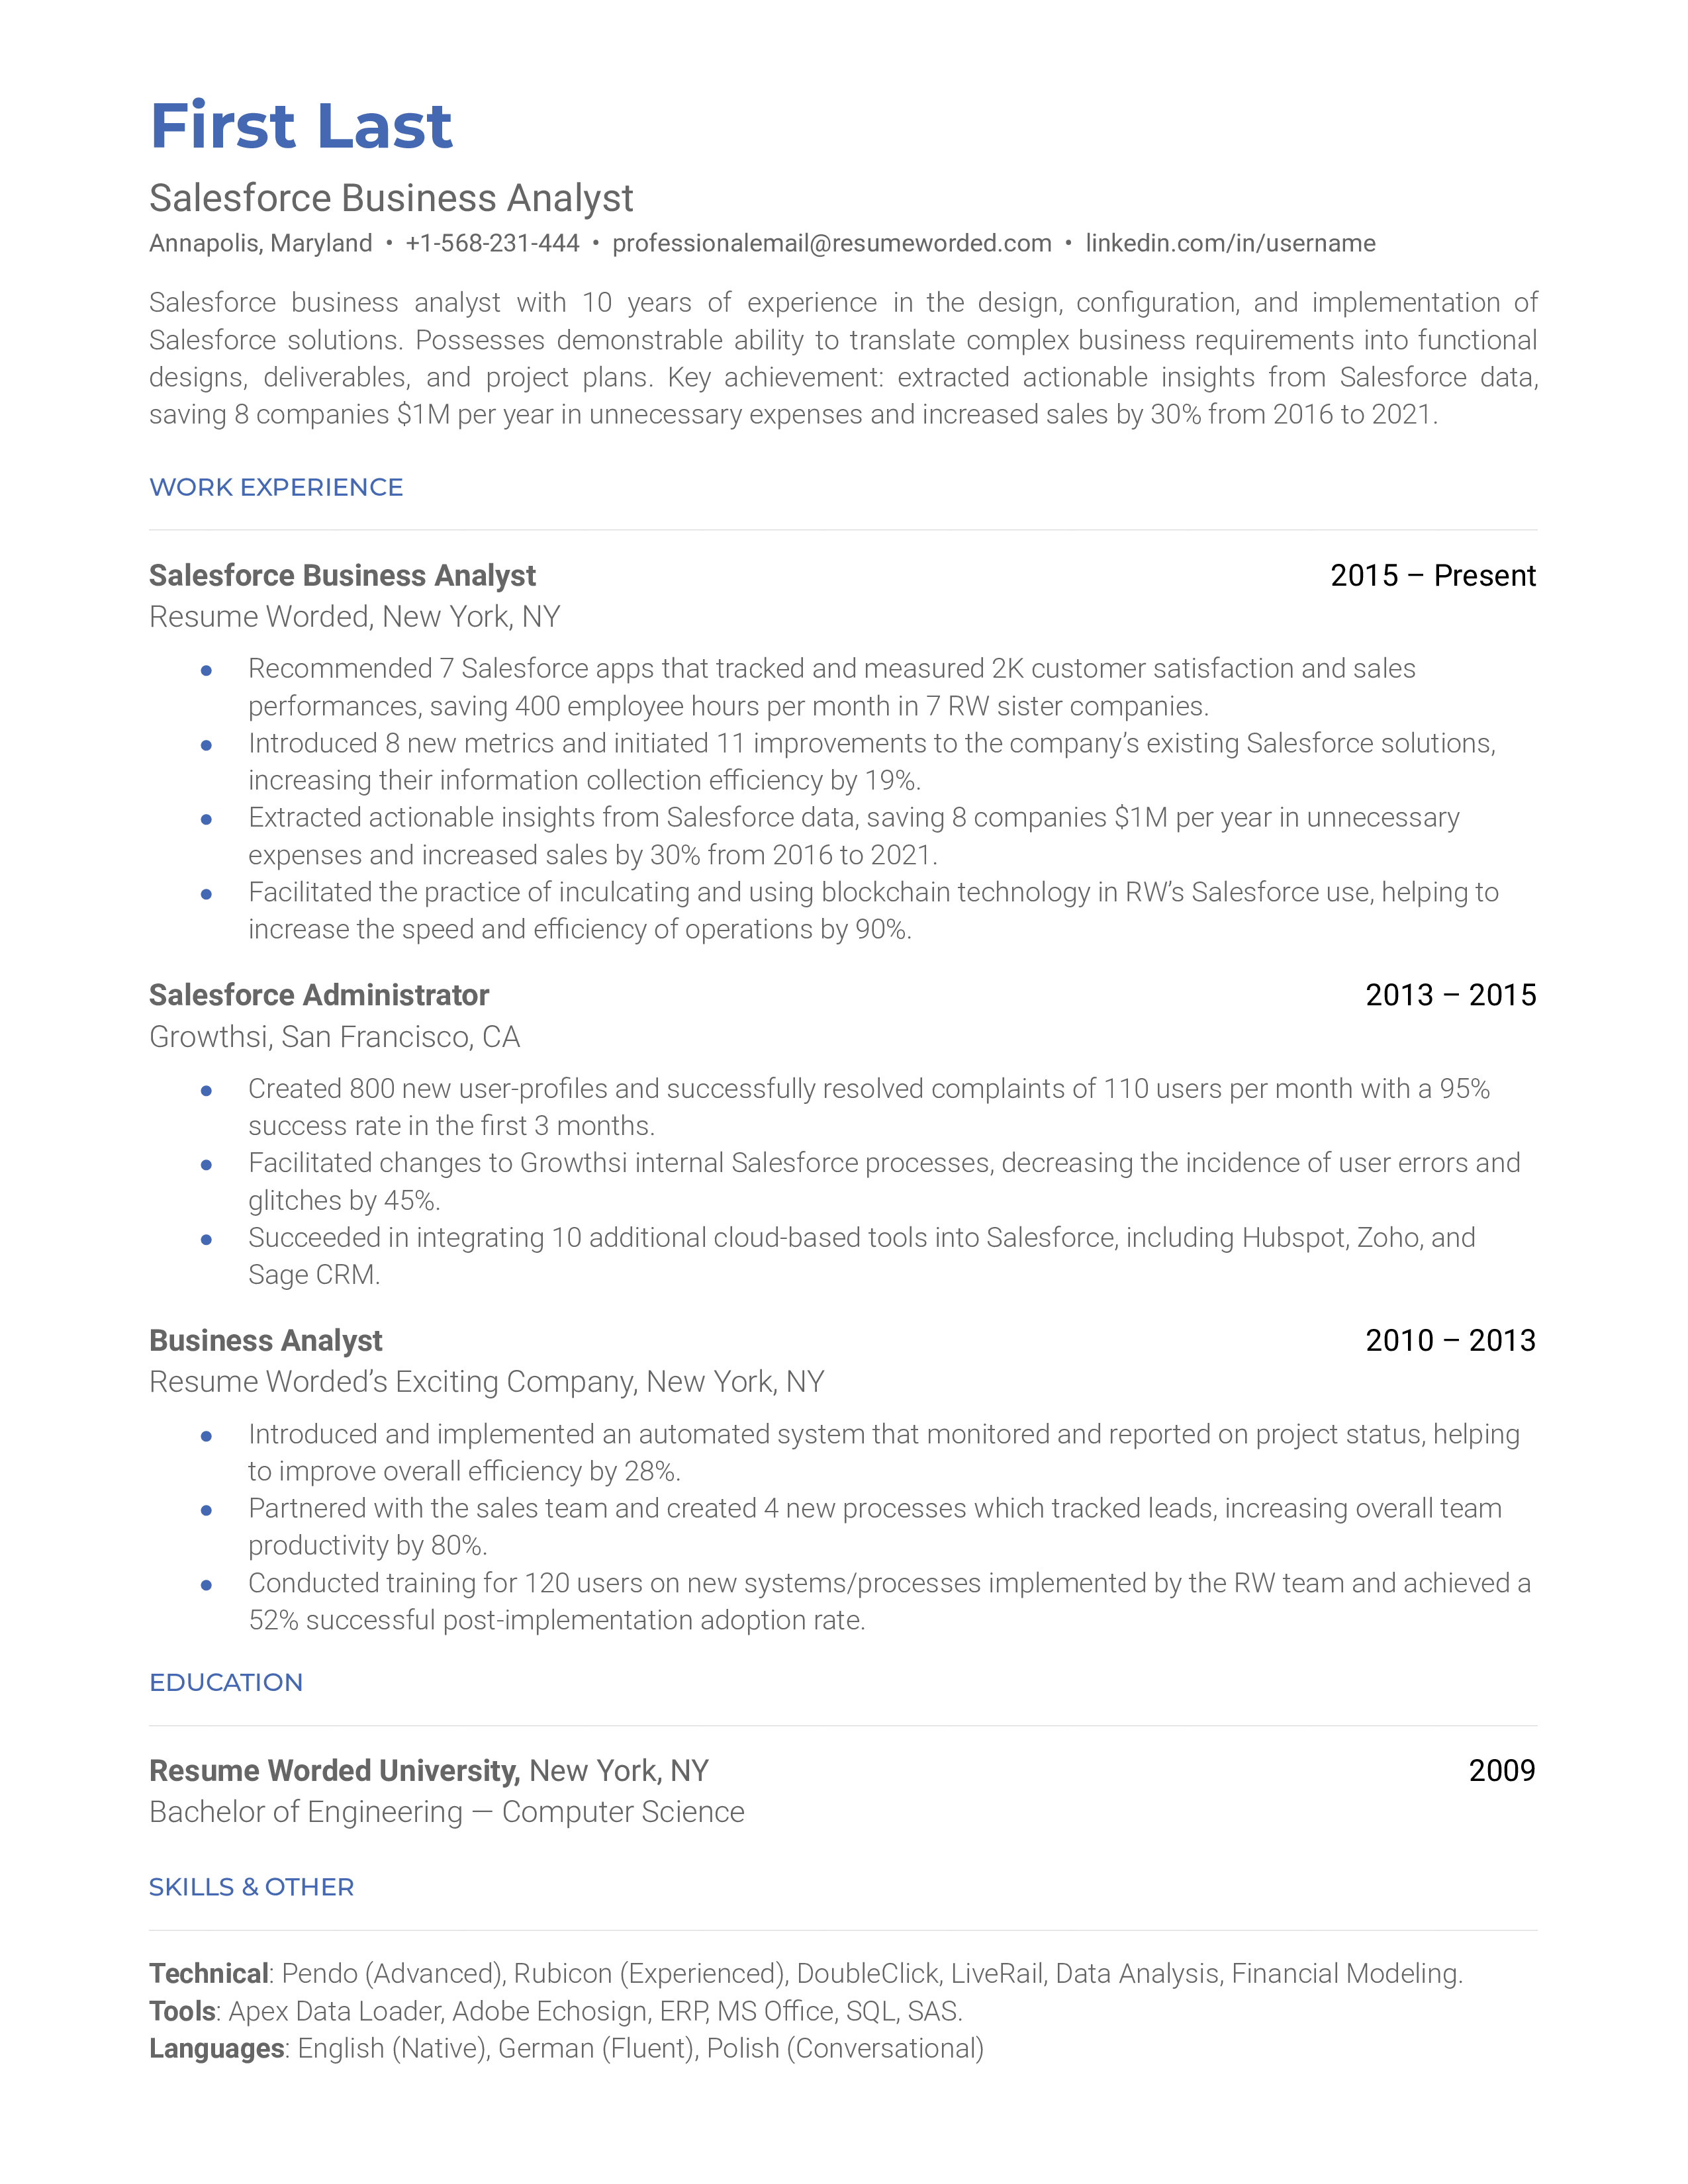 A sample CV for a Salesforce Business Analyst role, showing key qualifications and experiences.